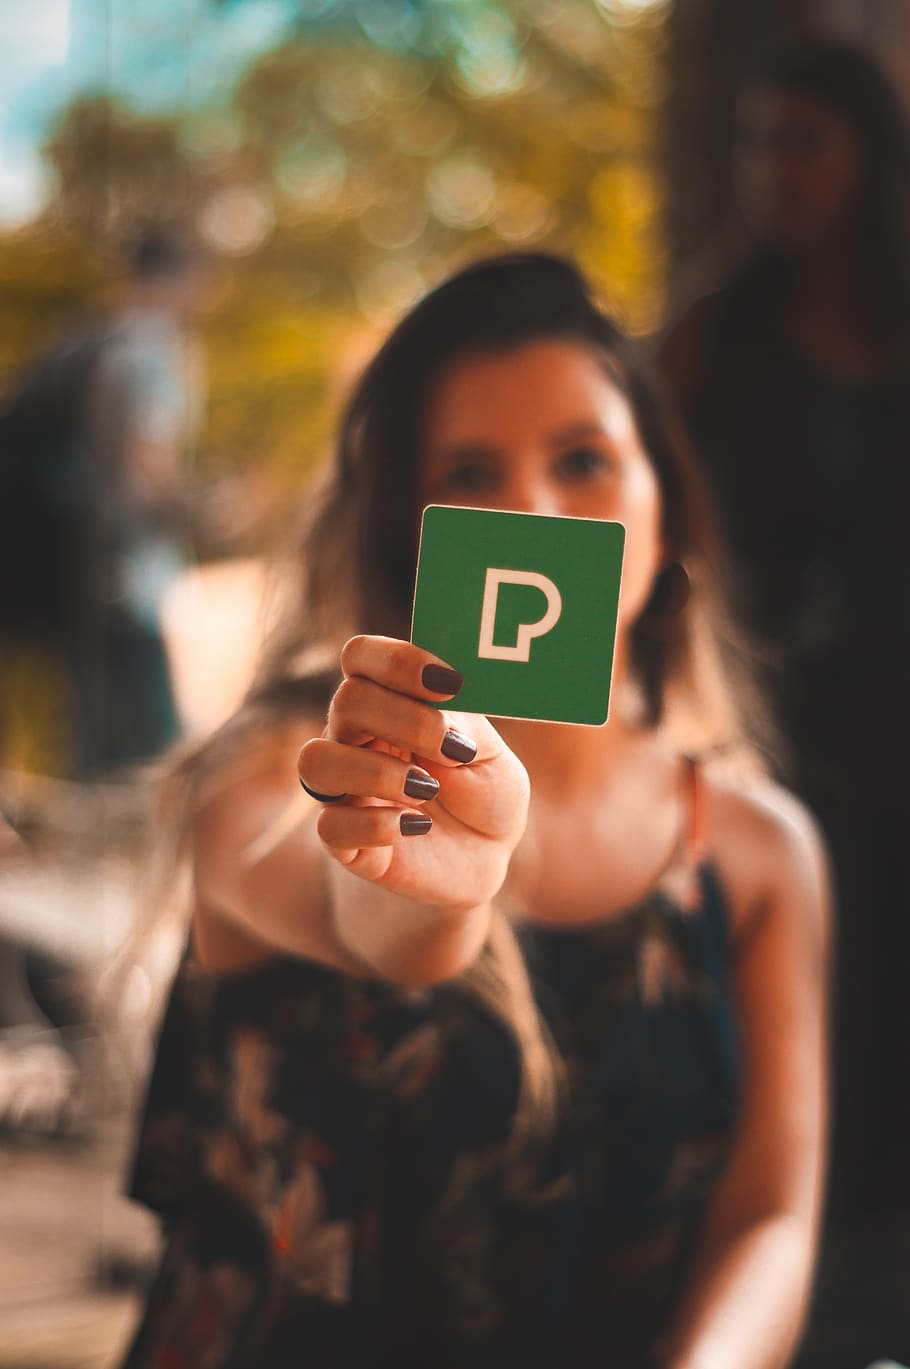 HD wallpaper: Person Holding Green P Card, blur, blurred background, depth of field - Wallpaper Flare